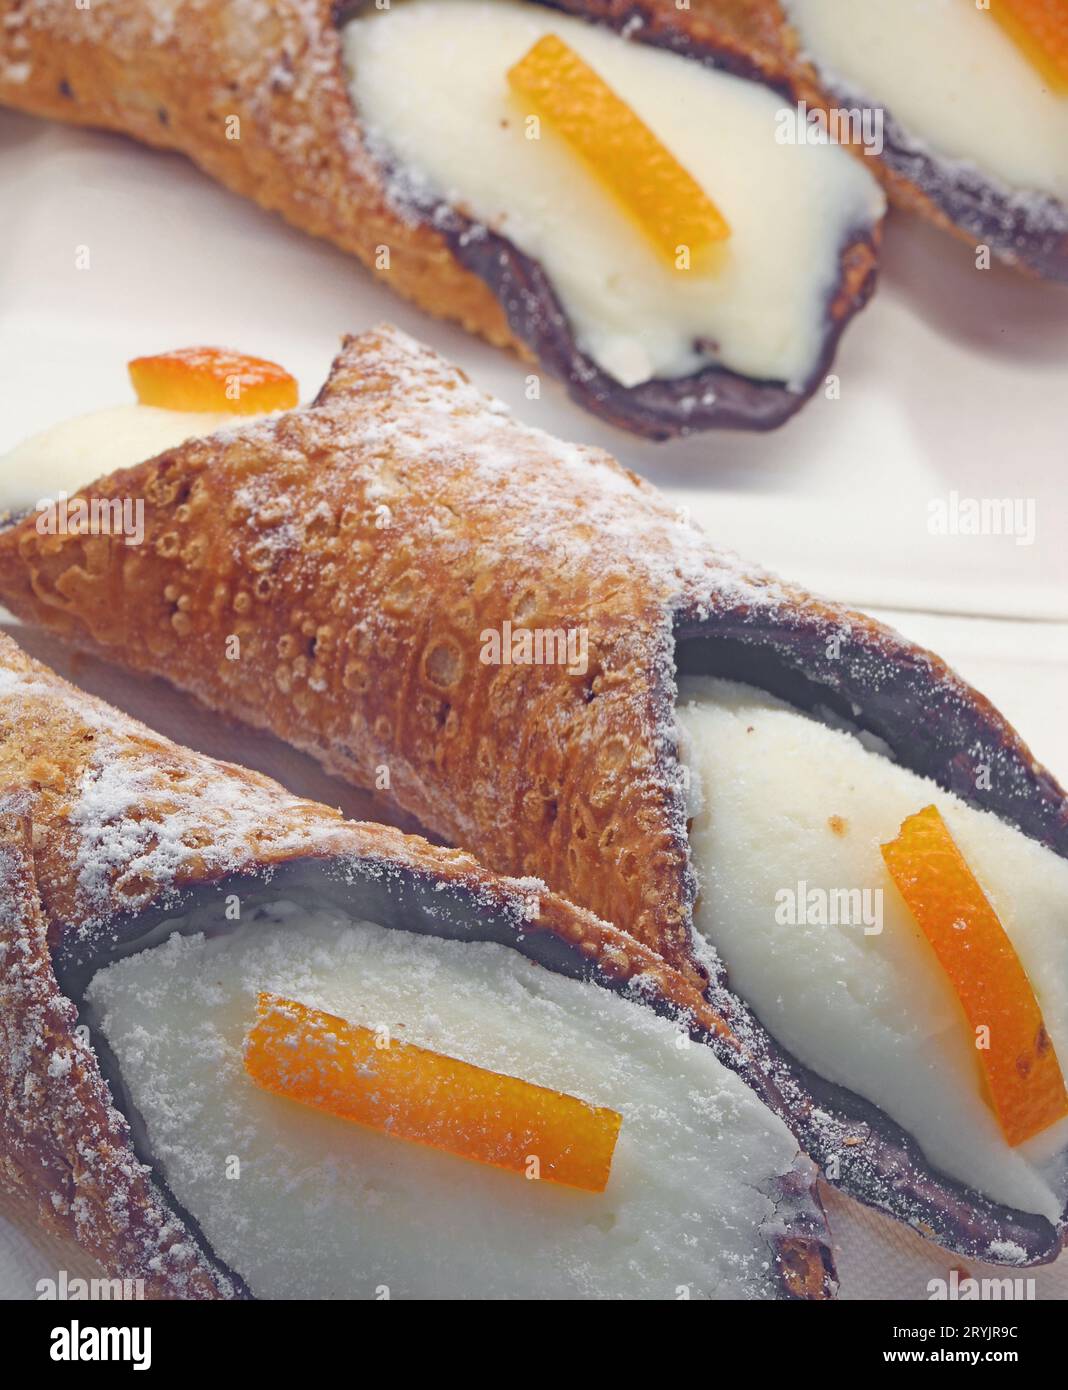 Sicilian cannoli made with sheep s cheese and a strip of candied orange peel typical dessert of Italy Stock Photo